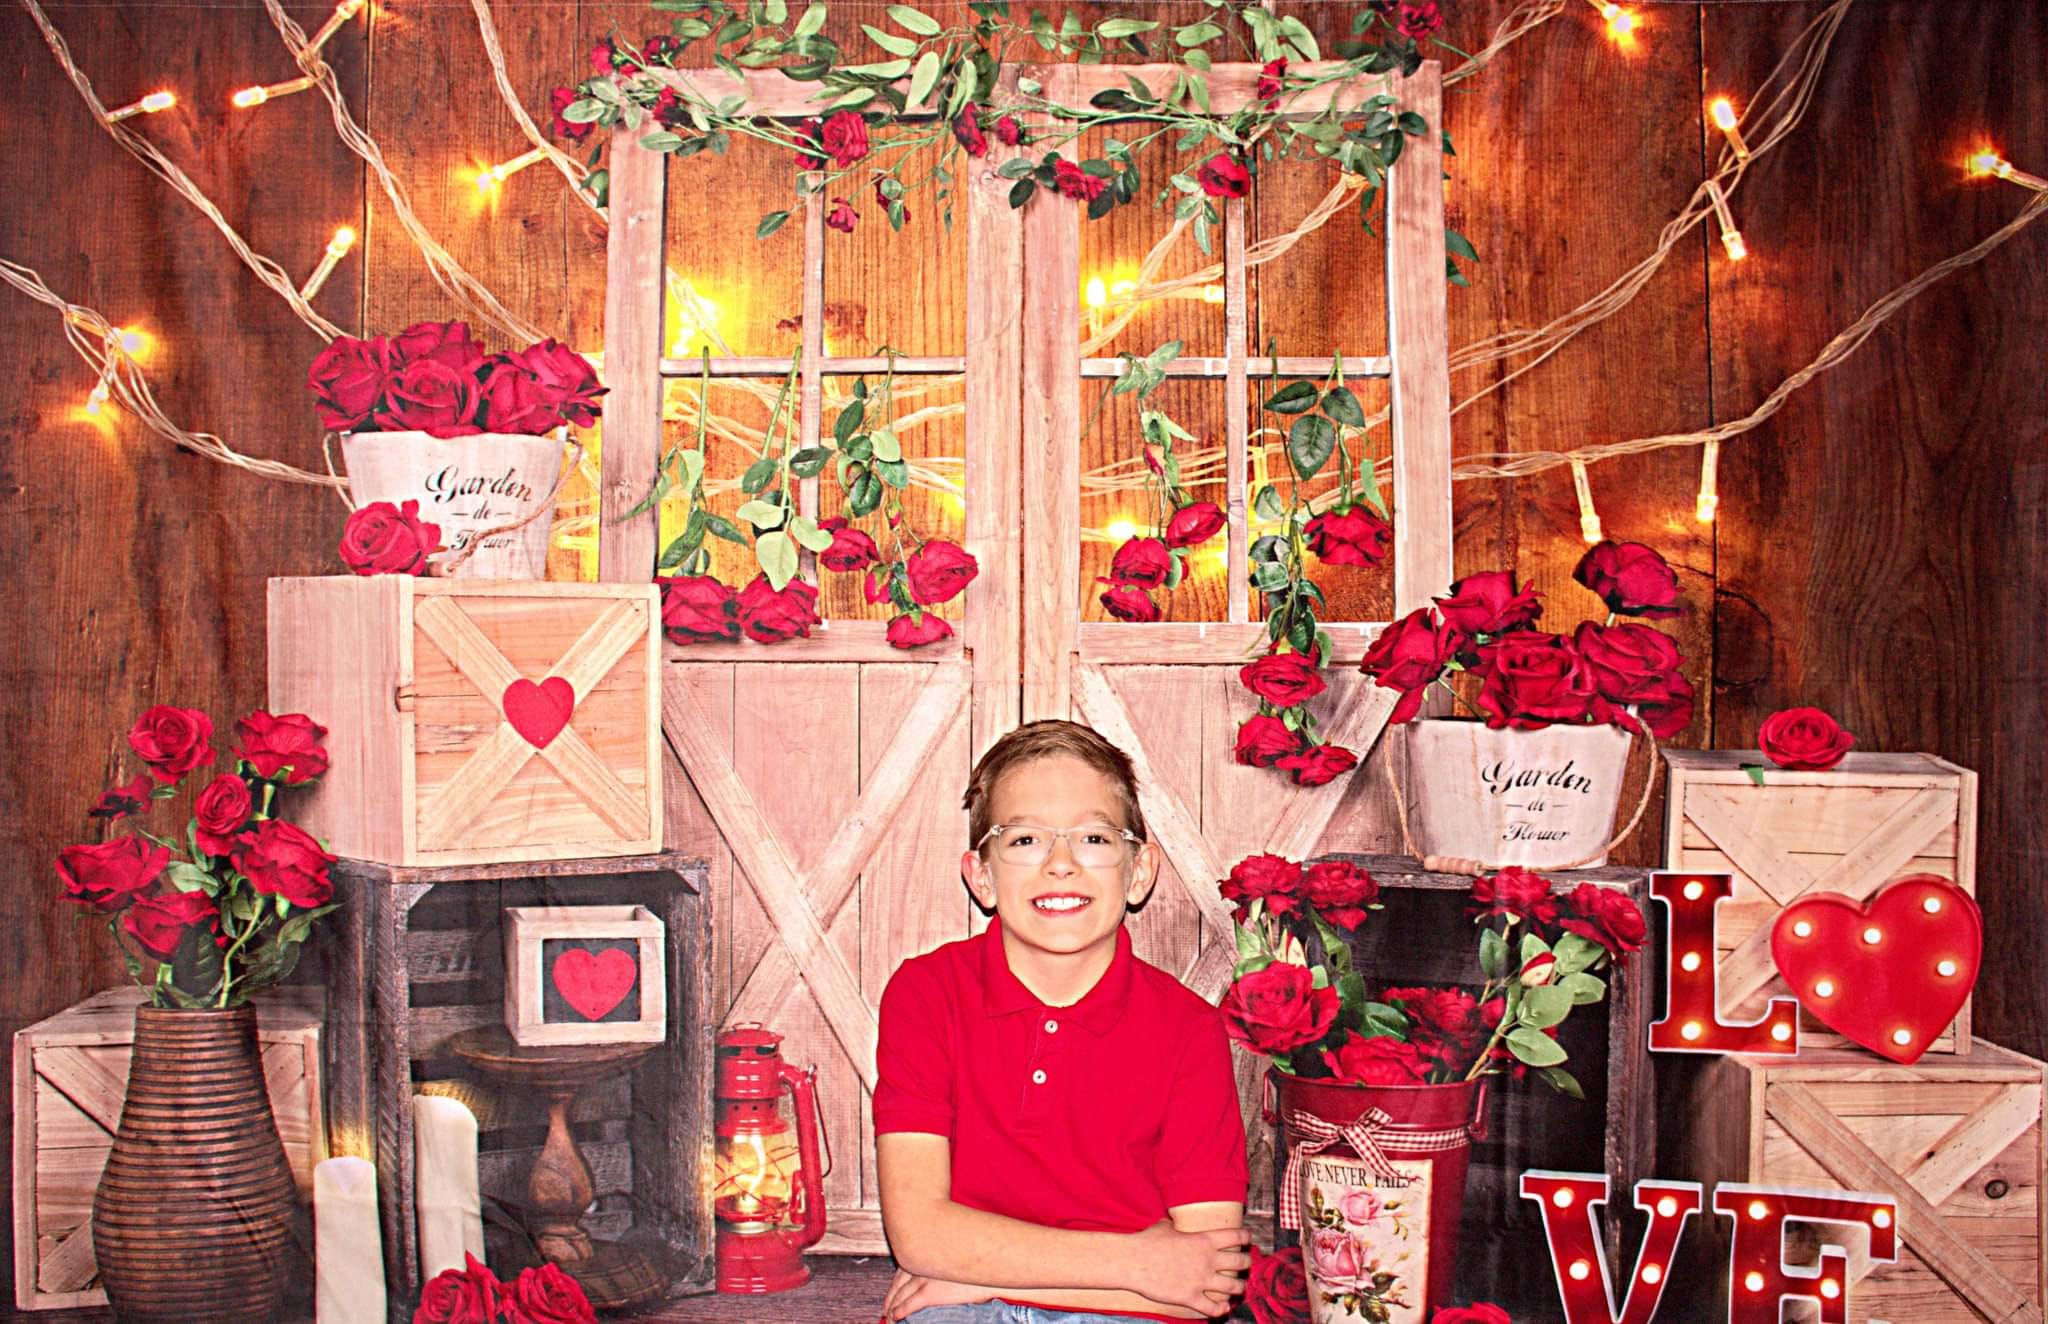 Kate Valentine's Day Roses Lights Backdrop Designed by Emetselch